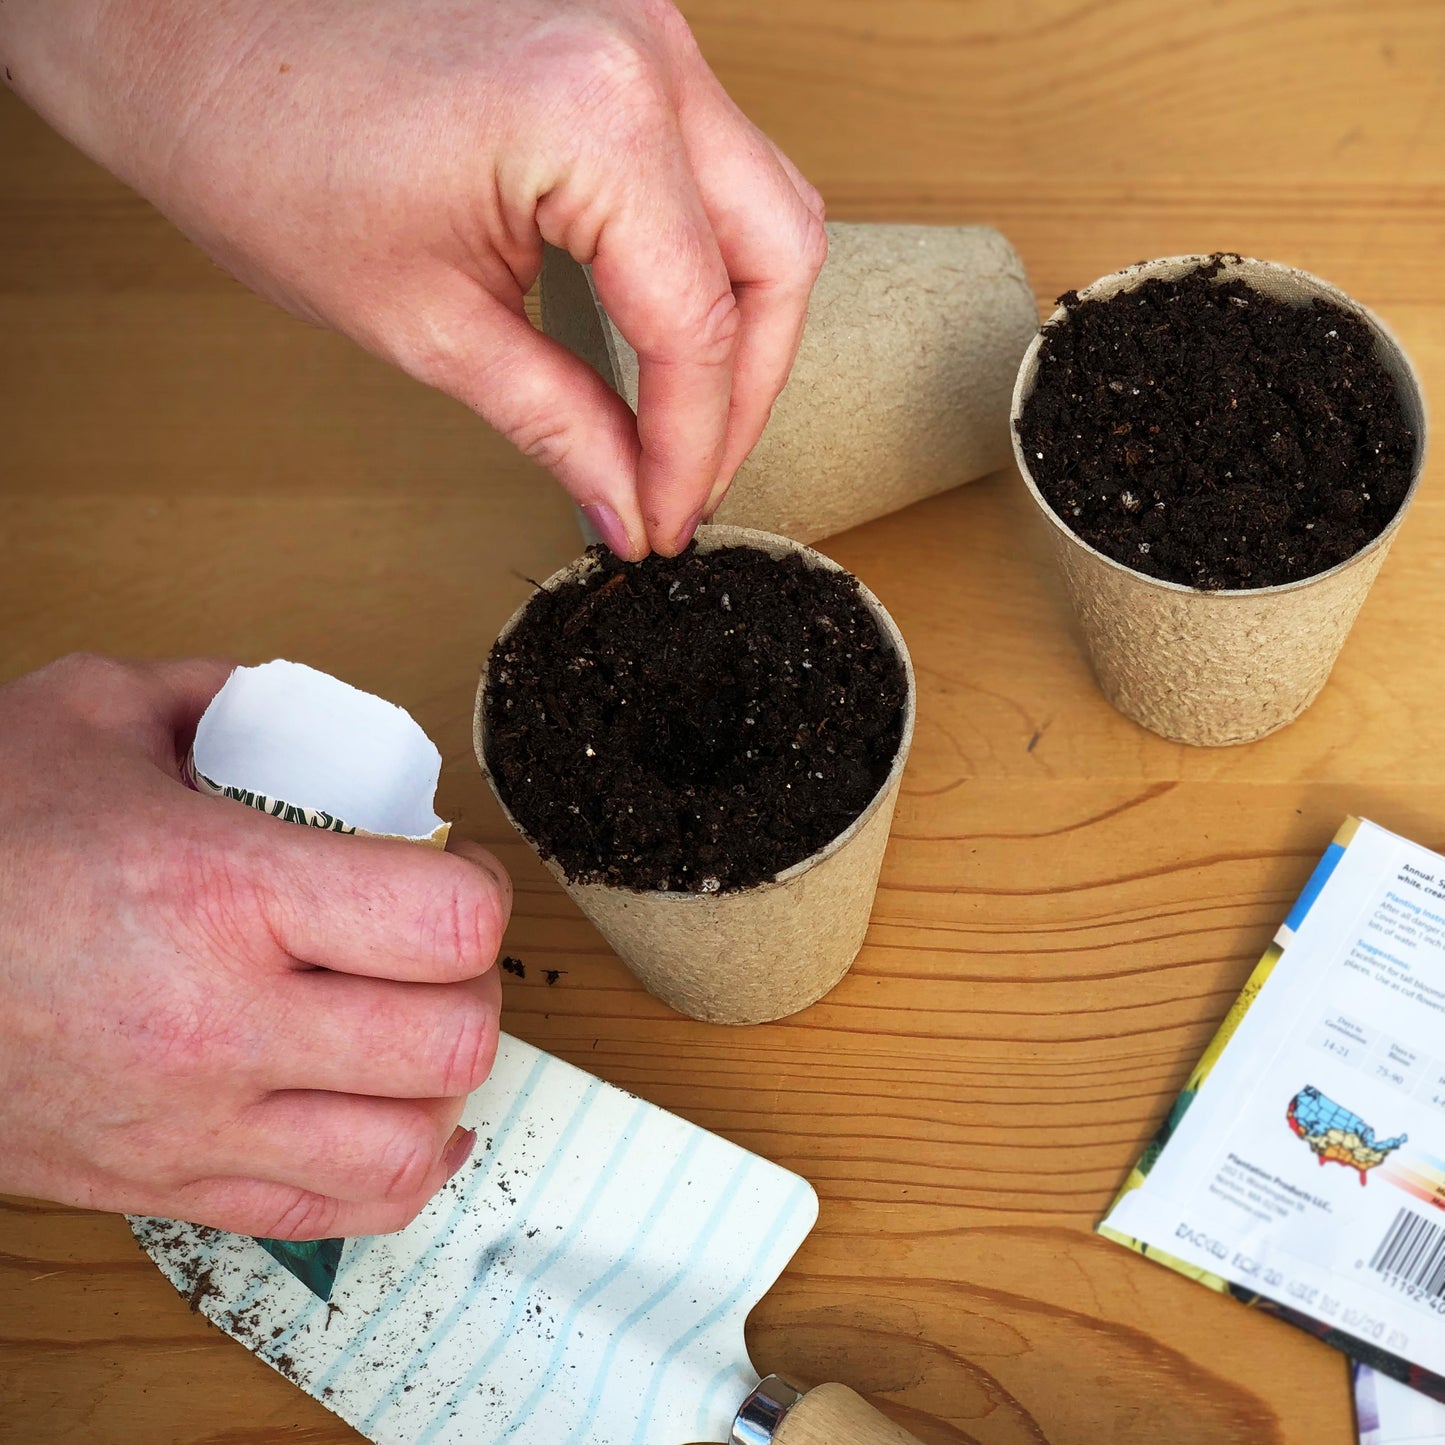 Sowing Yellow Summer Crookneck Squash Seeds into a biodegradable Jiffy seed starting peat pot filled with Jiffy Seed Starting Mix.